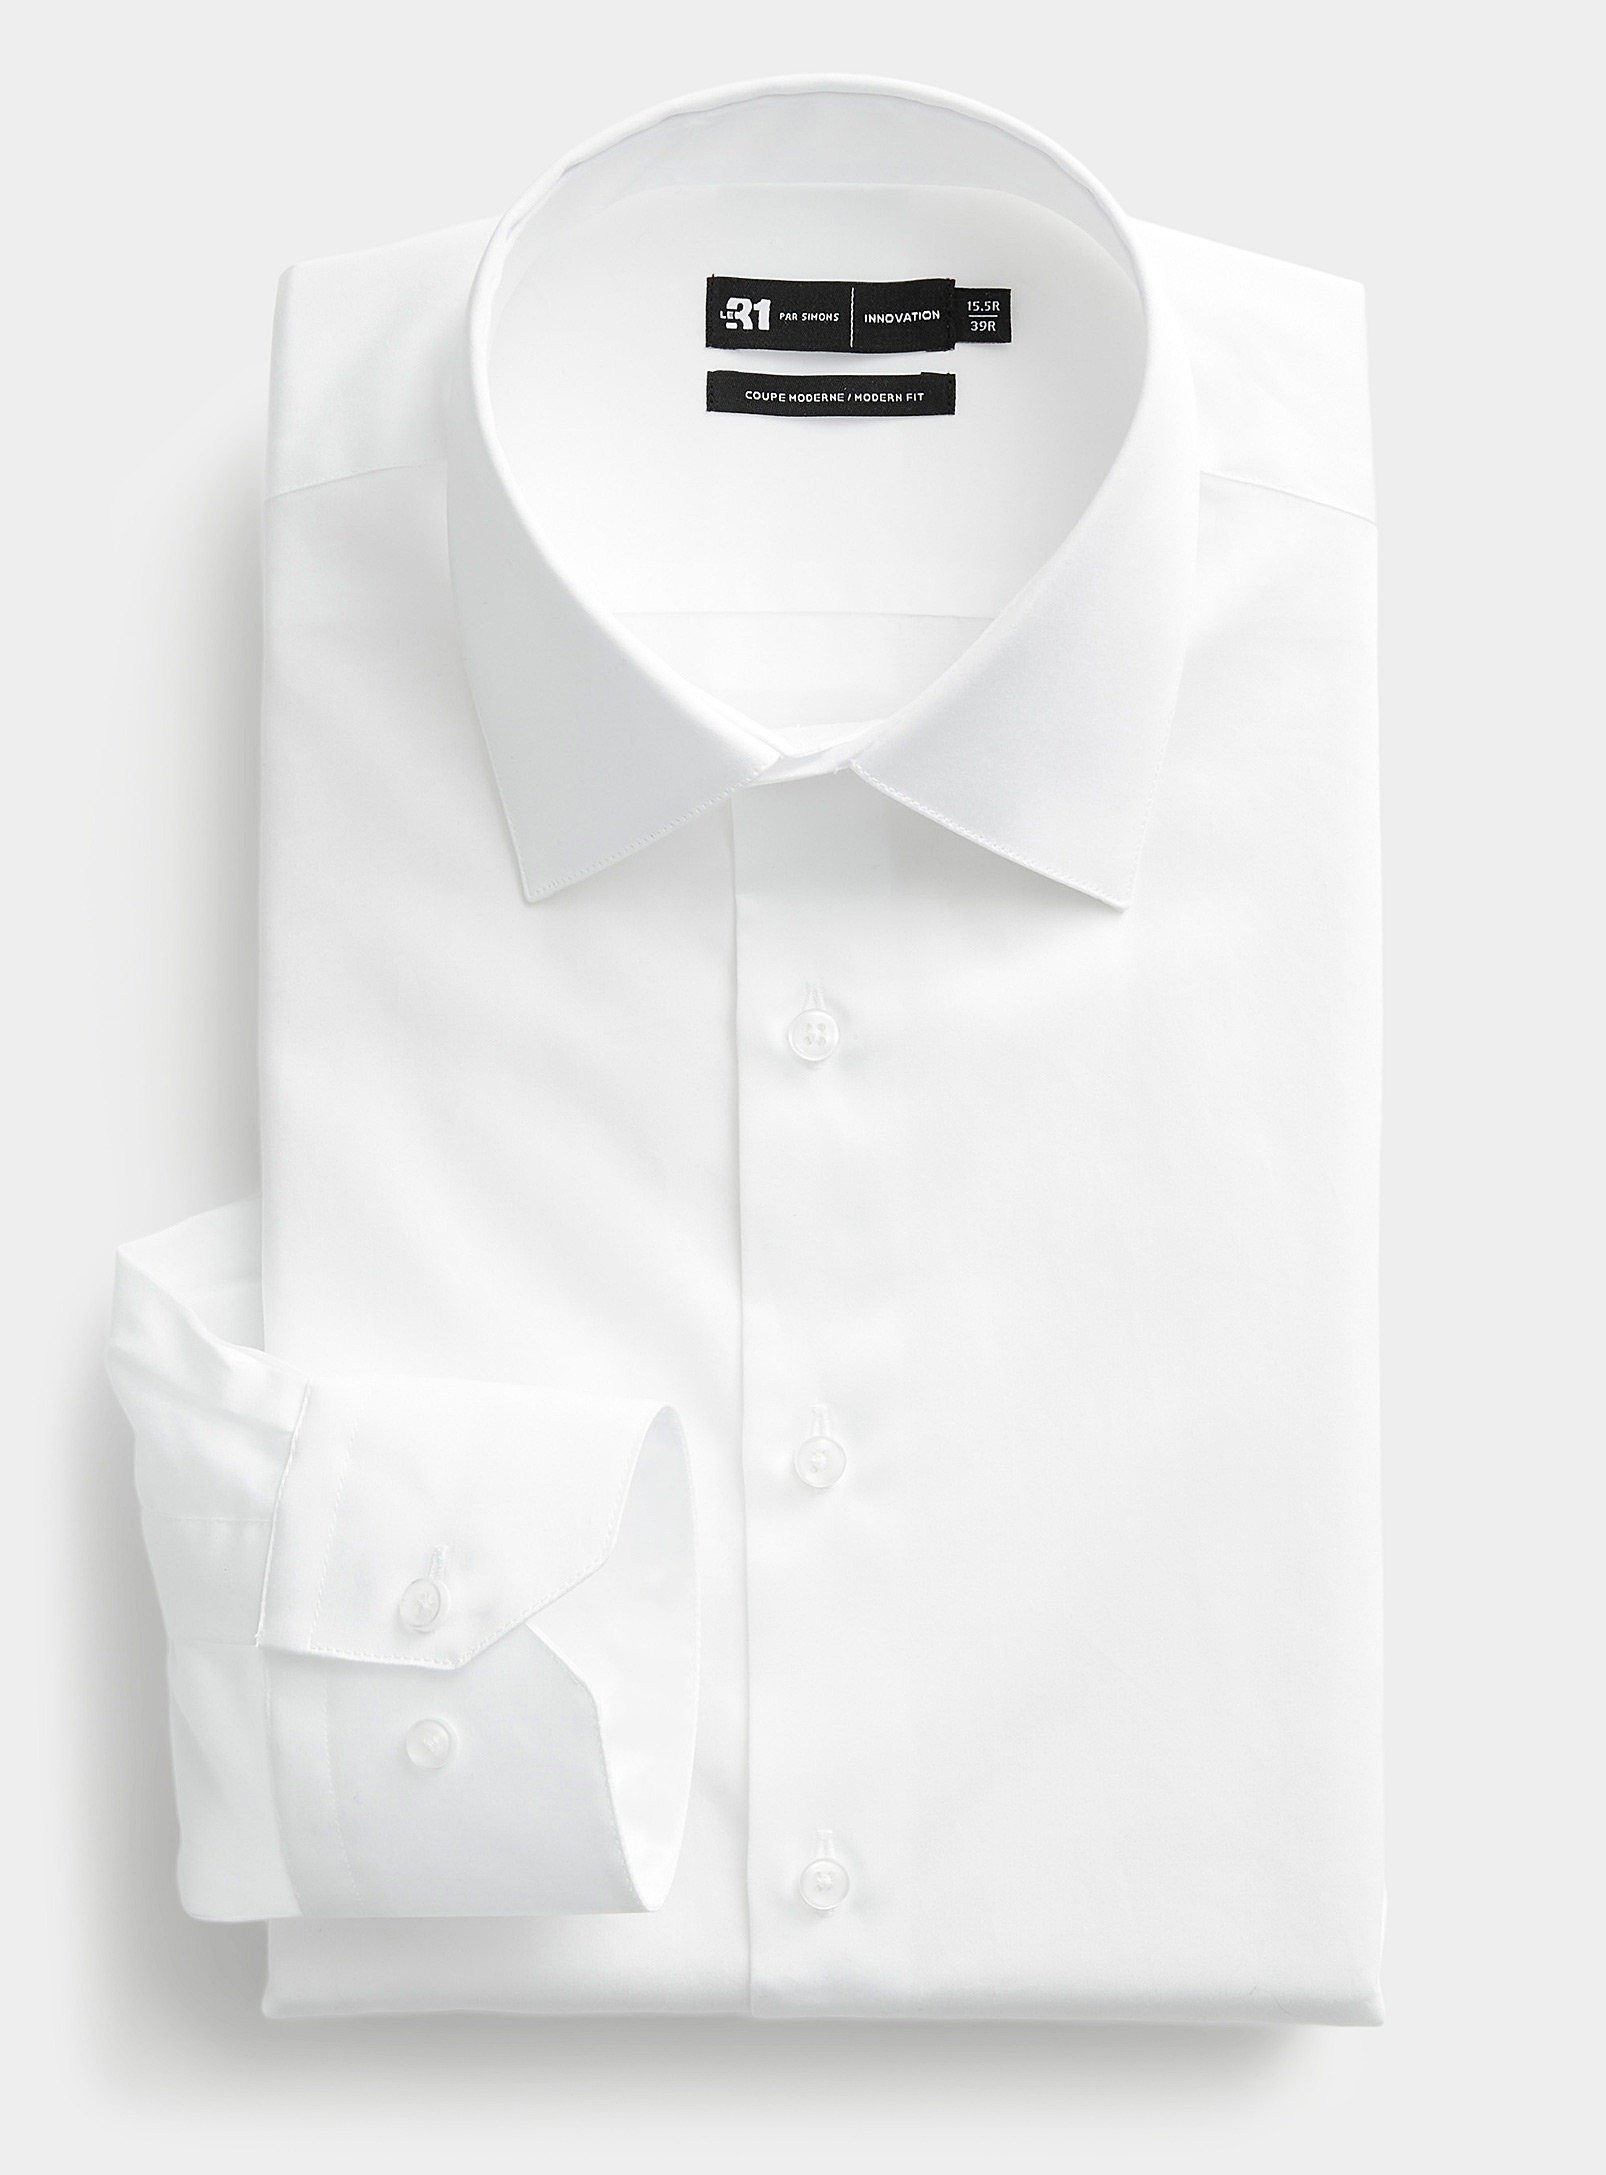 Le 31 - Men's Stain-resistant shirt Modern fit Innovation collection